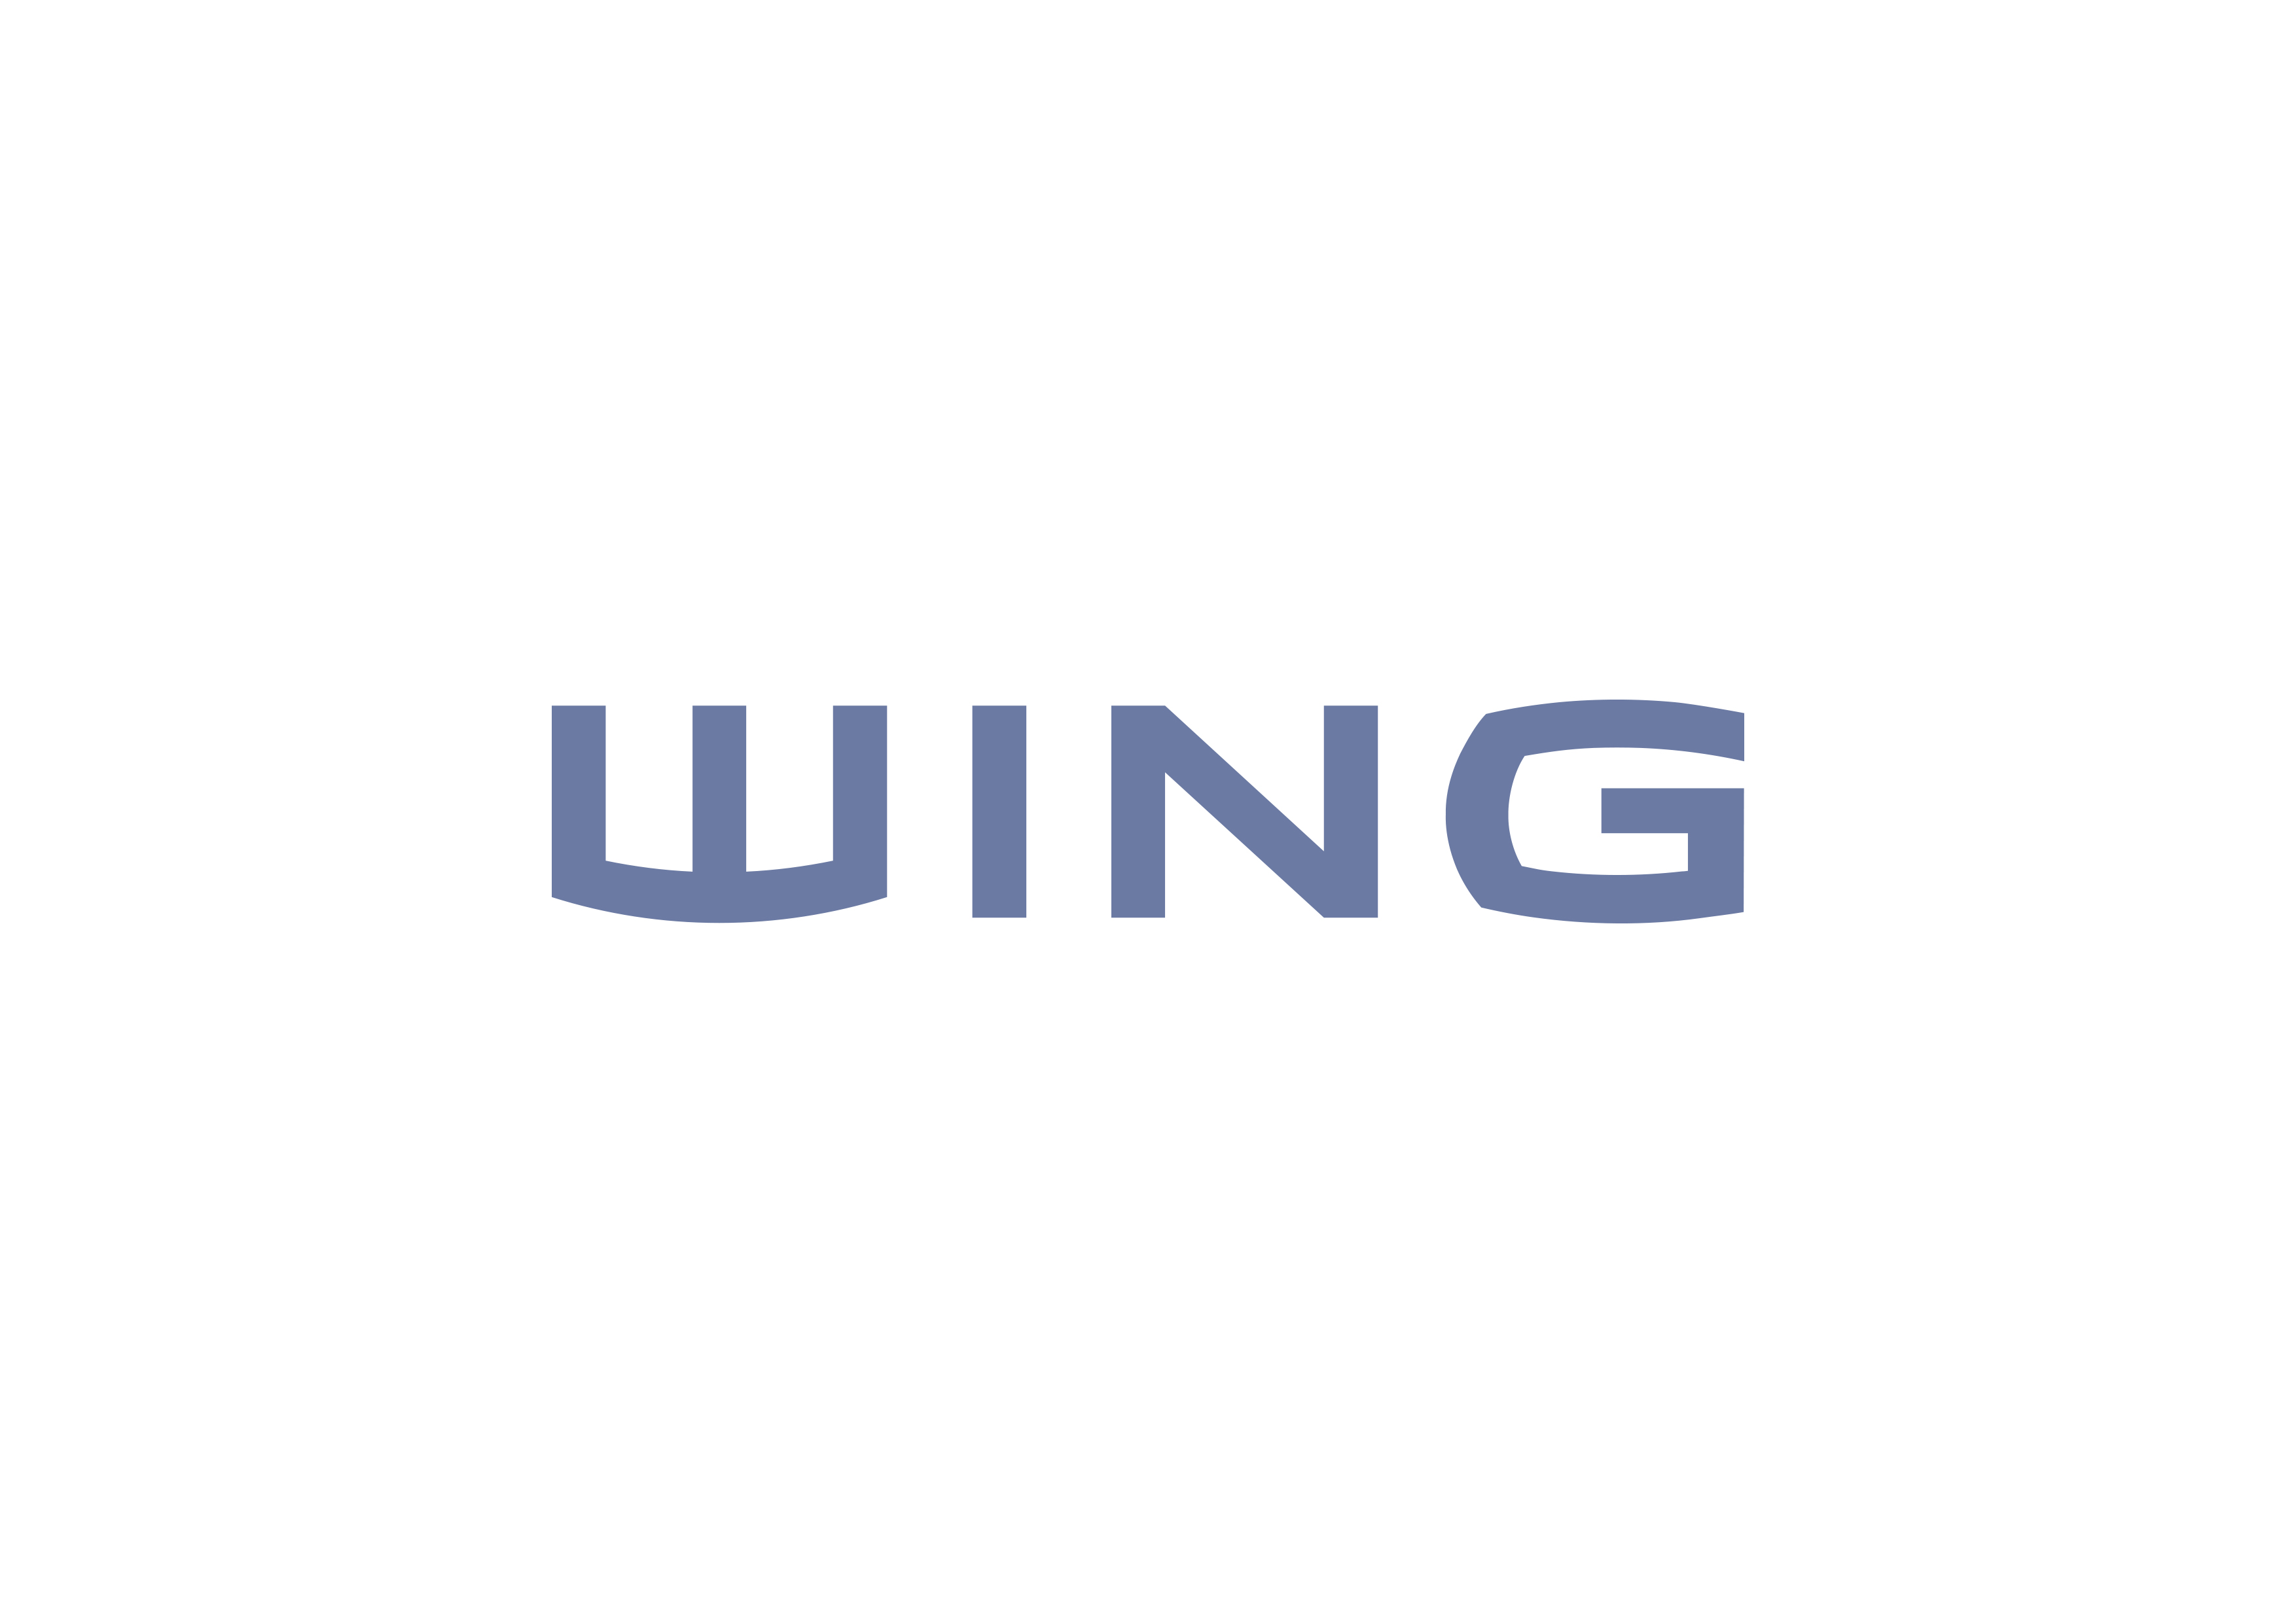 WING Enter to the Polish Property Market